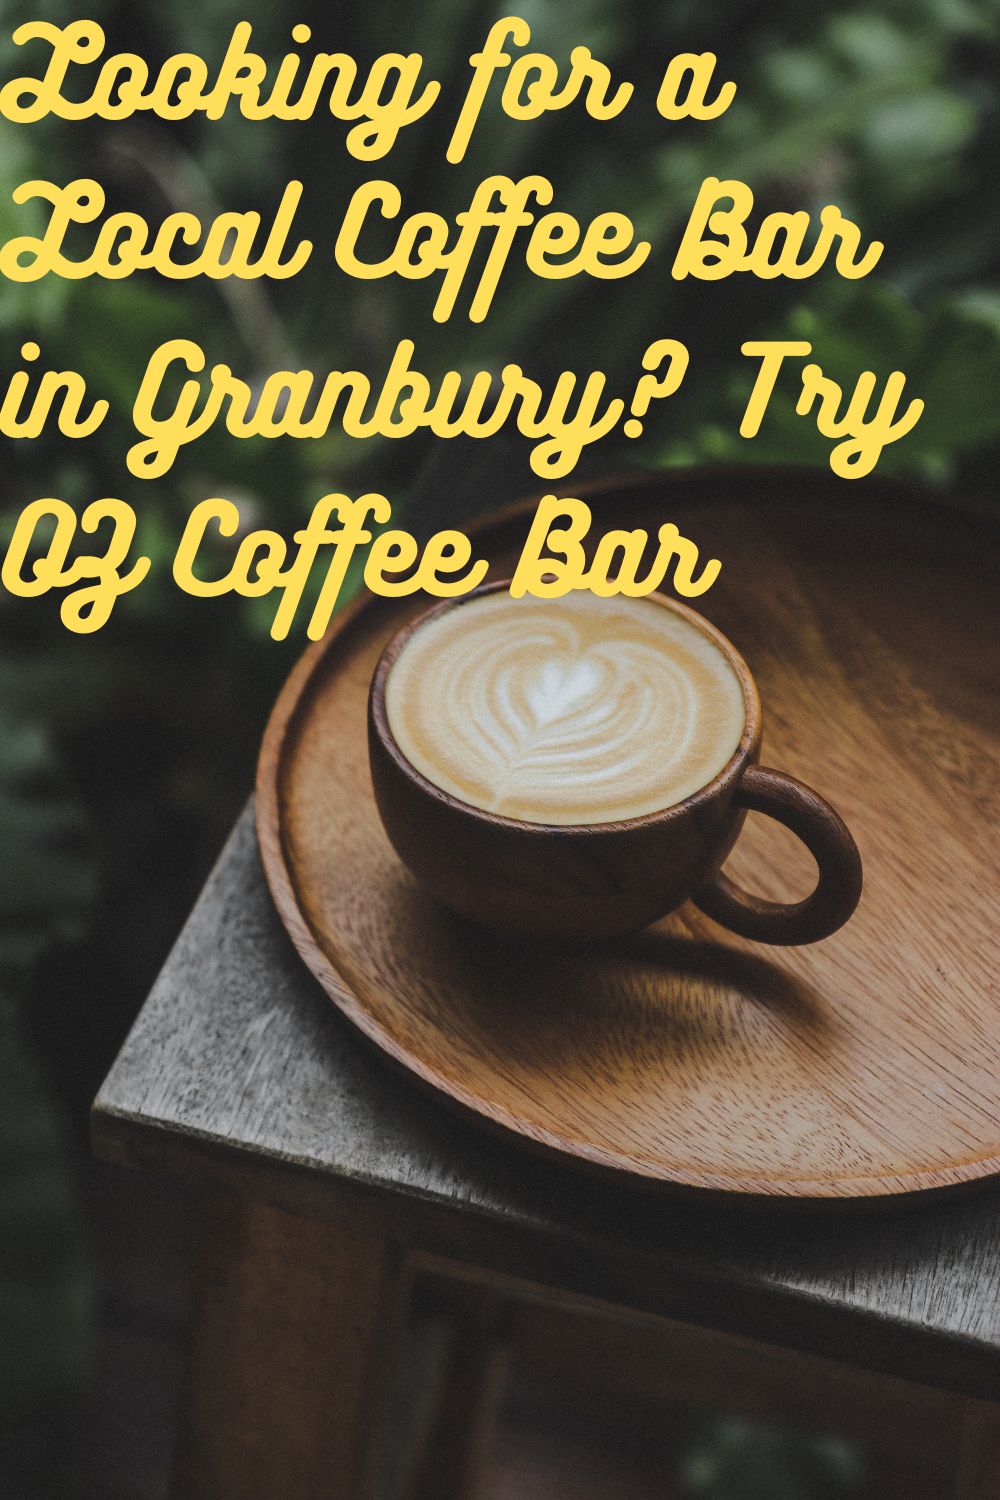 Looking for a Local Coffee Bar in Granbury? Try OZ Coffee Bar